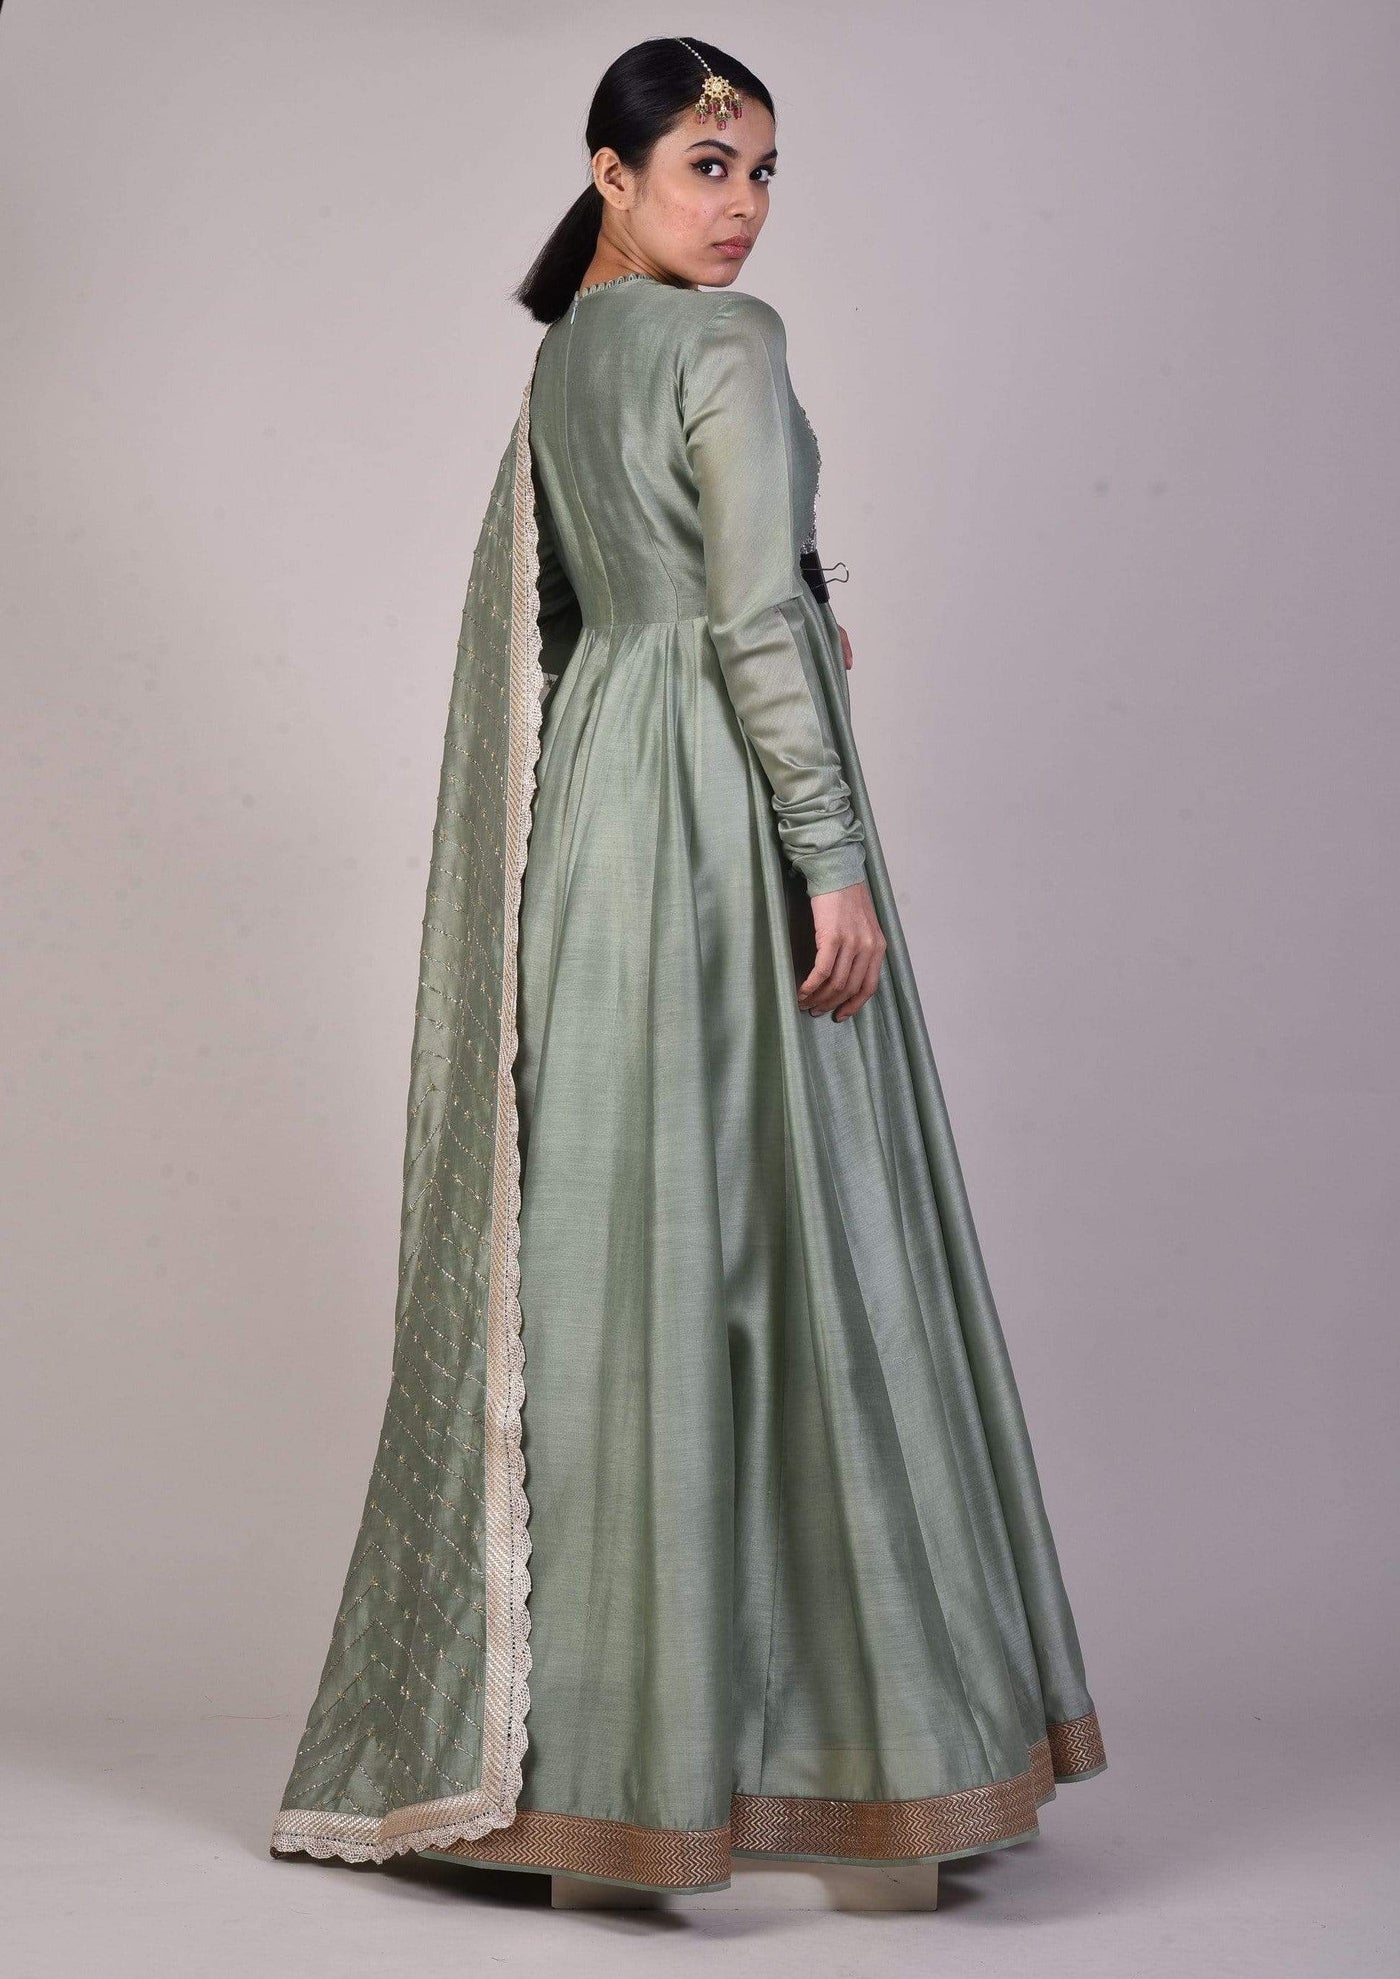 Mint Green Yoke Anarkali - Indian Clothing in Denver, CO, Aurora, CO, Boulder, CO, Fort Collins, CO, Colorado Springs, CO, Parker, CO, Highlands Ranch, CO, Cherry Creek, CO, Centennial, CO, and Longmont, CO. Nationwide shipping USA - India Fashion X